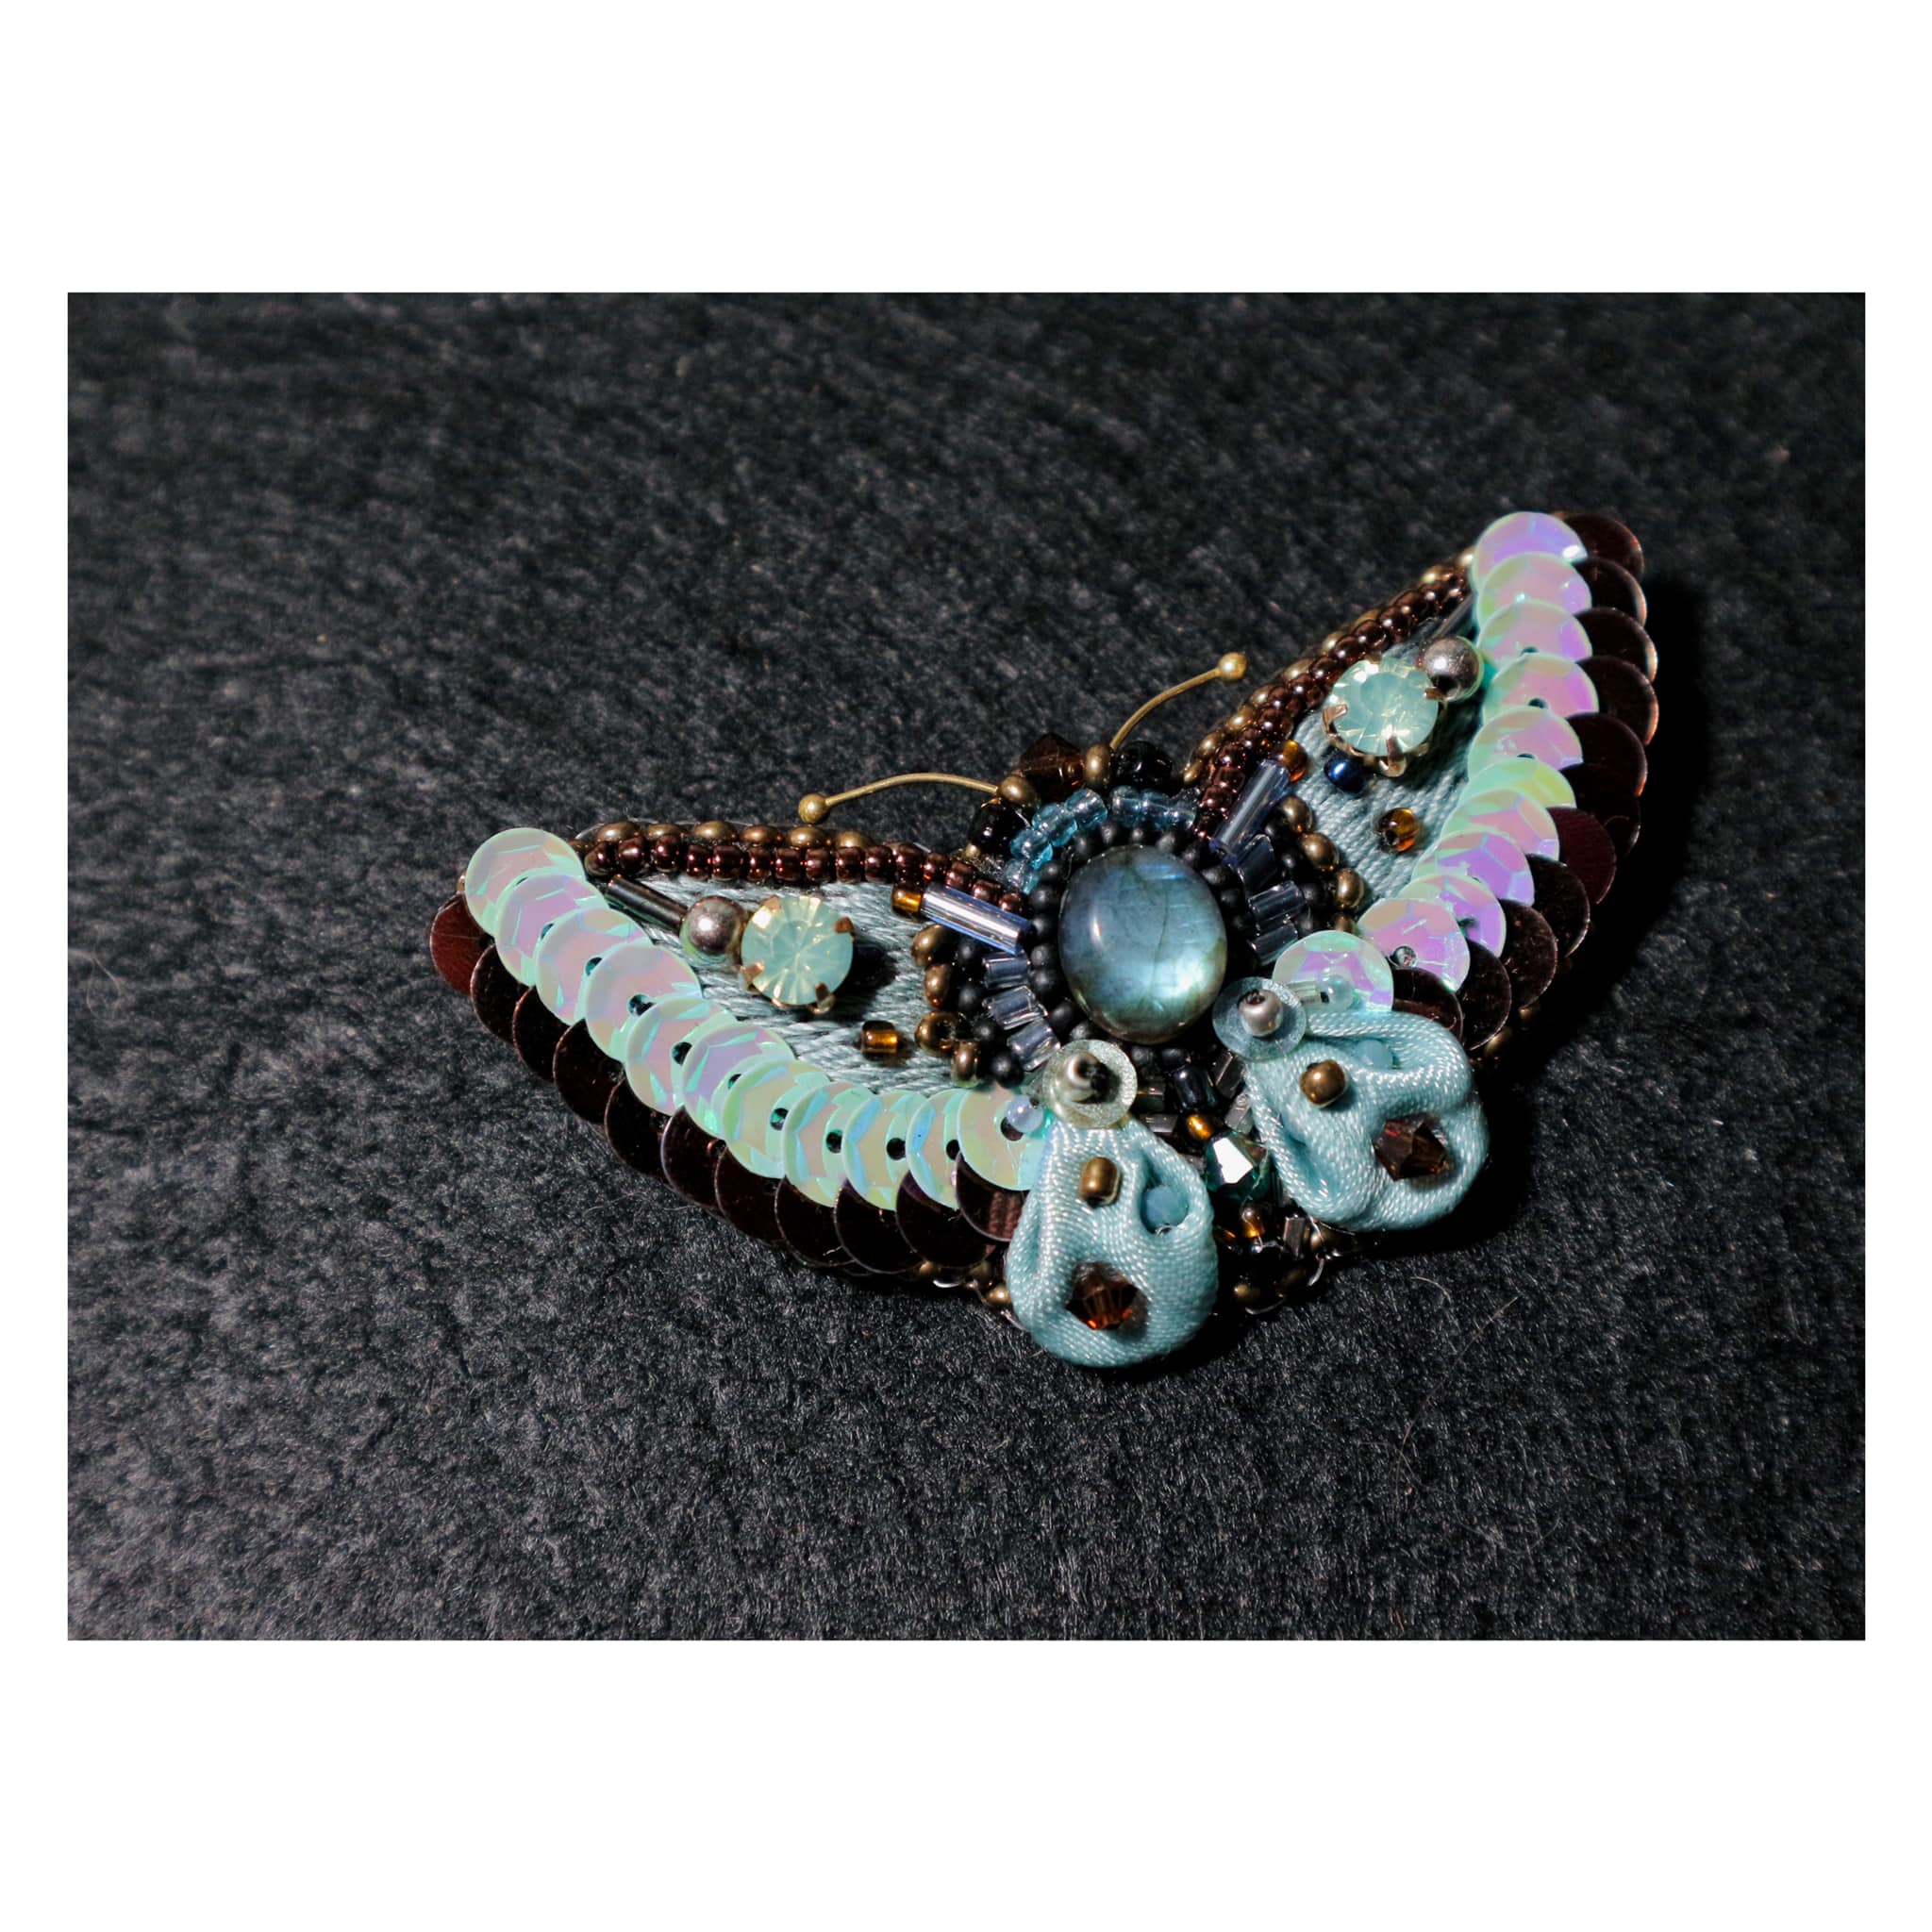 Shimmering moths in bead embroidery technique